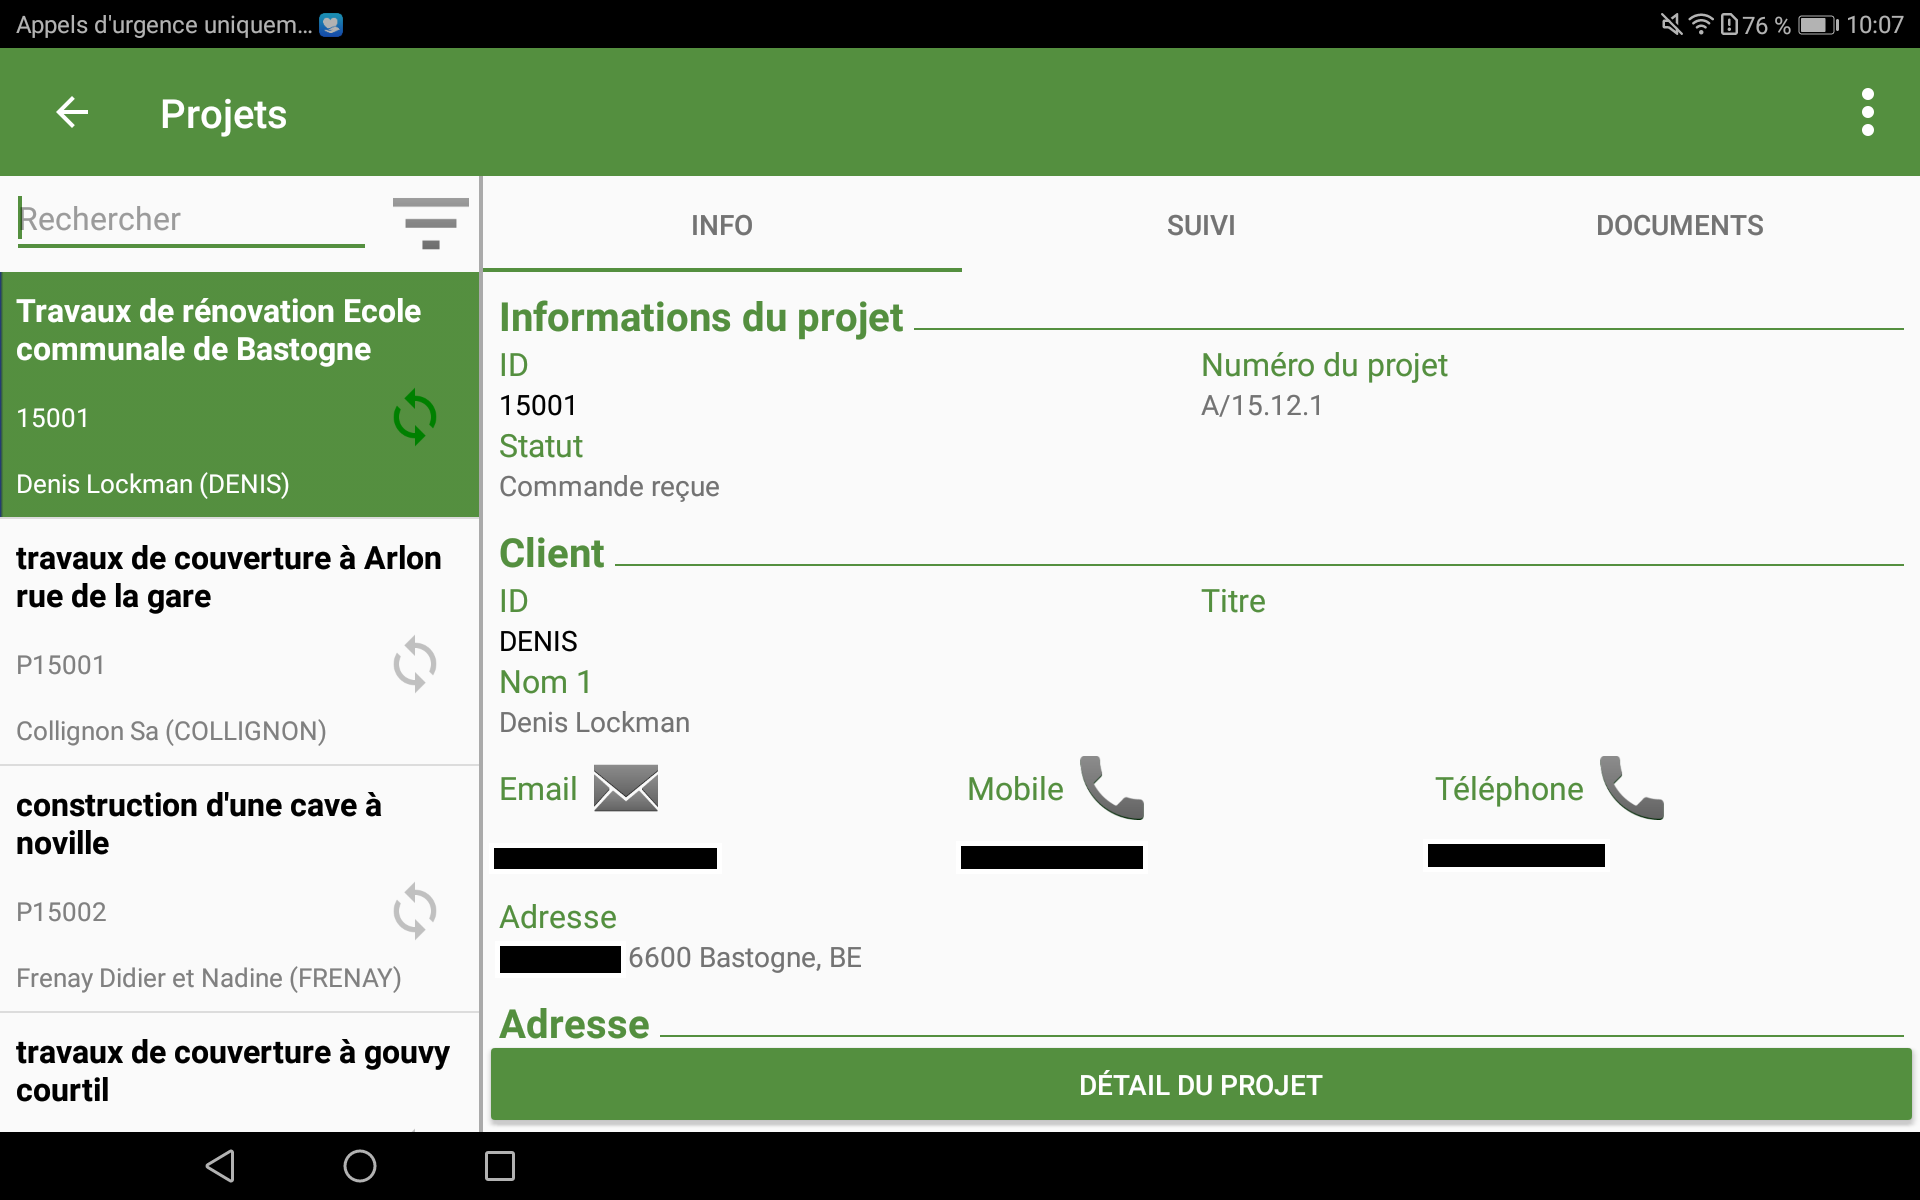 Project details in the Hit-Mobile ERP application